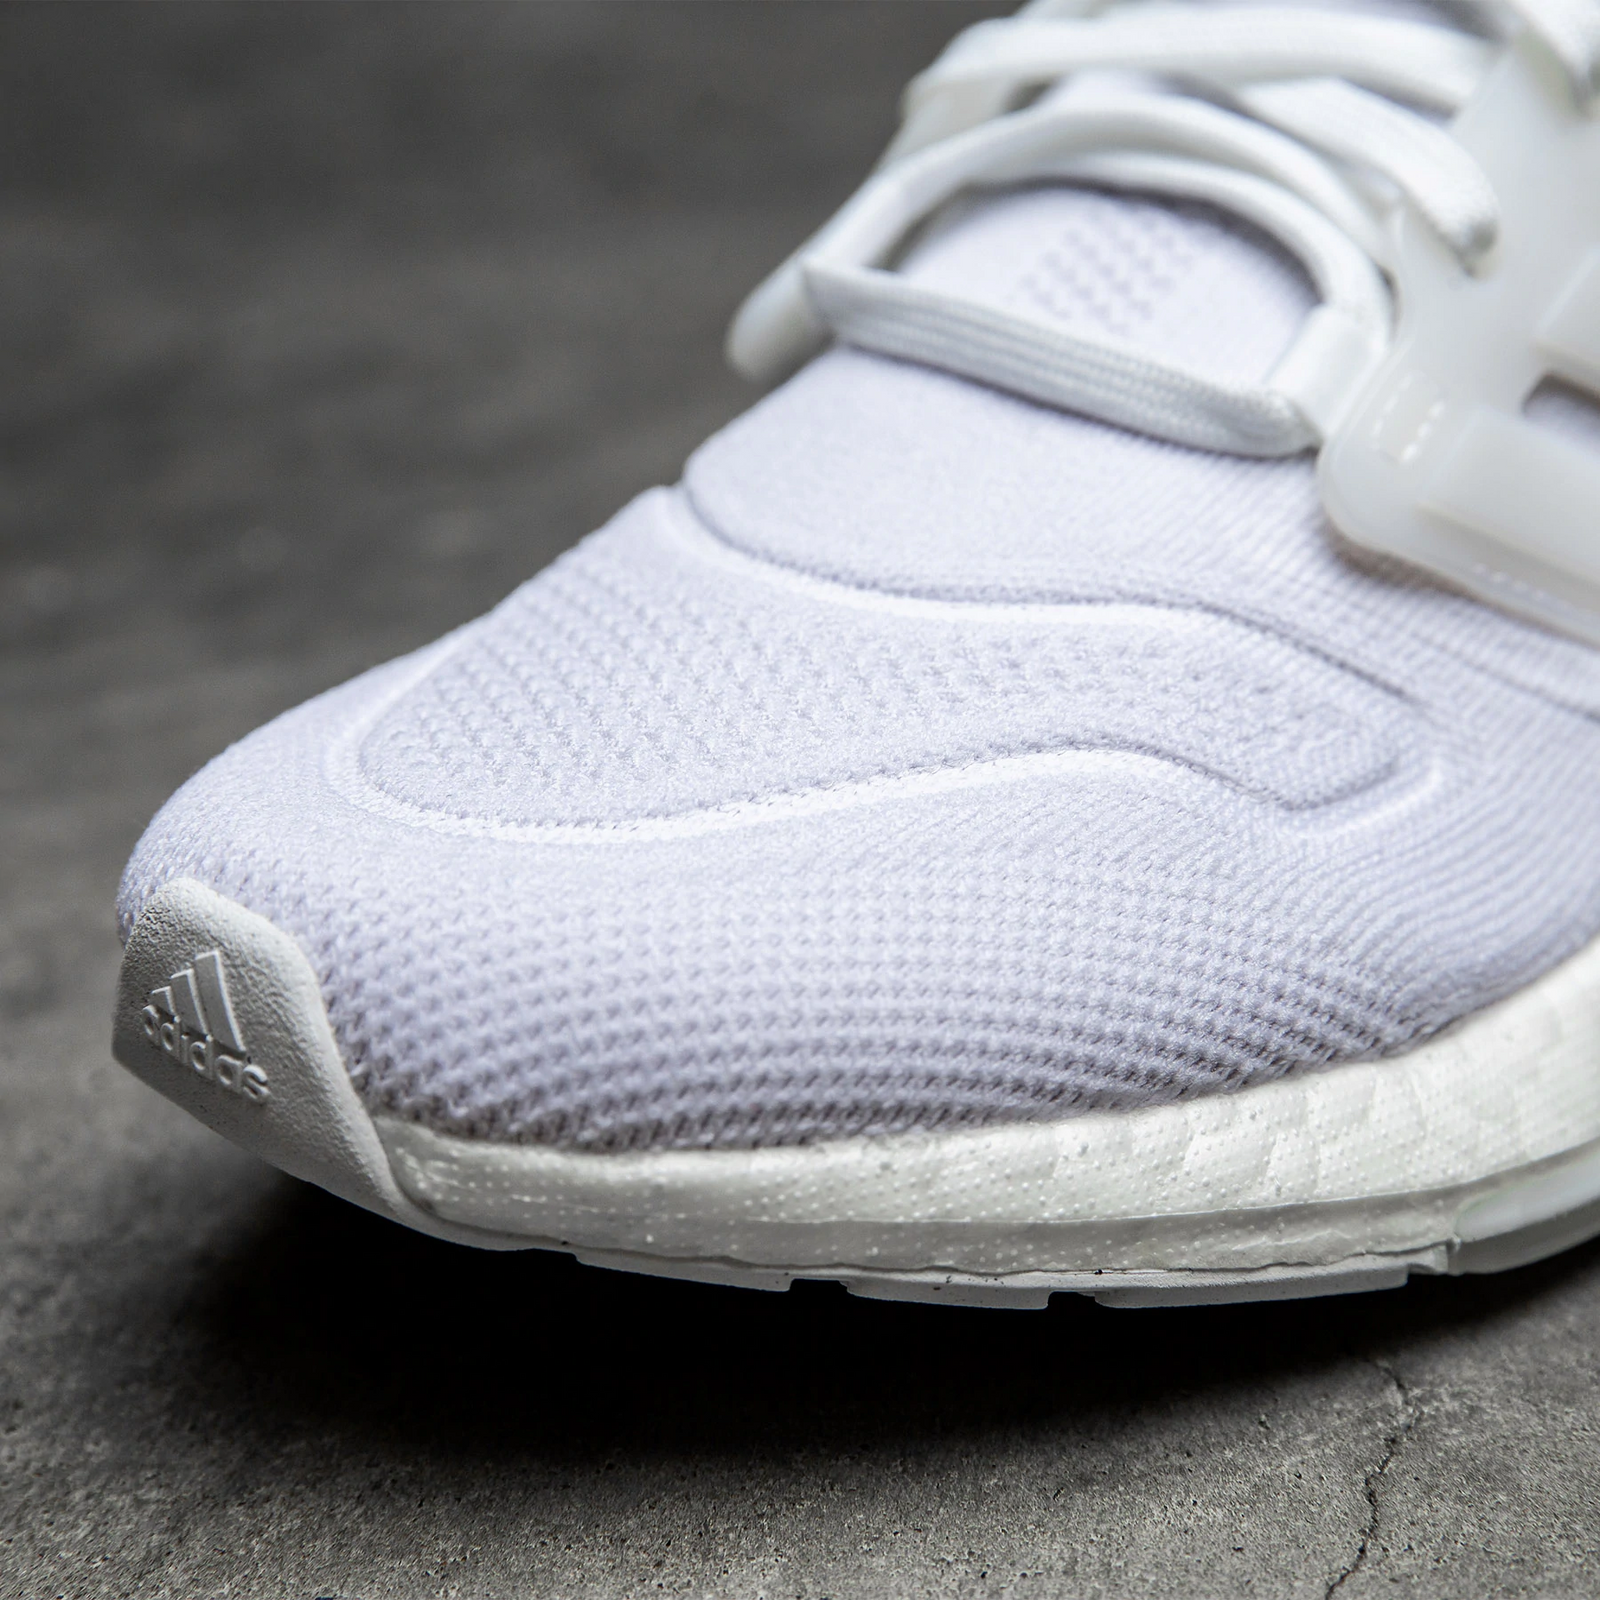 ADIDAS - ULTRABOOST SHOES - WOMEN'S CLOUD WHITE/CLOUD WHITE/CRYST thewodlife.com